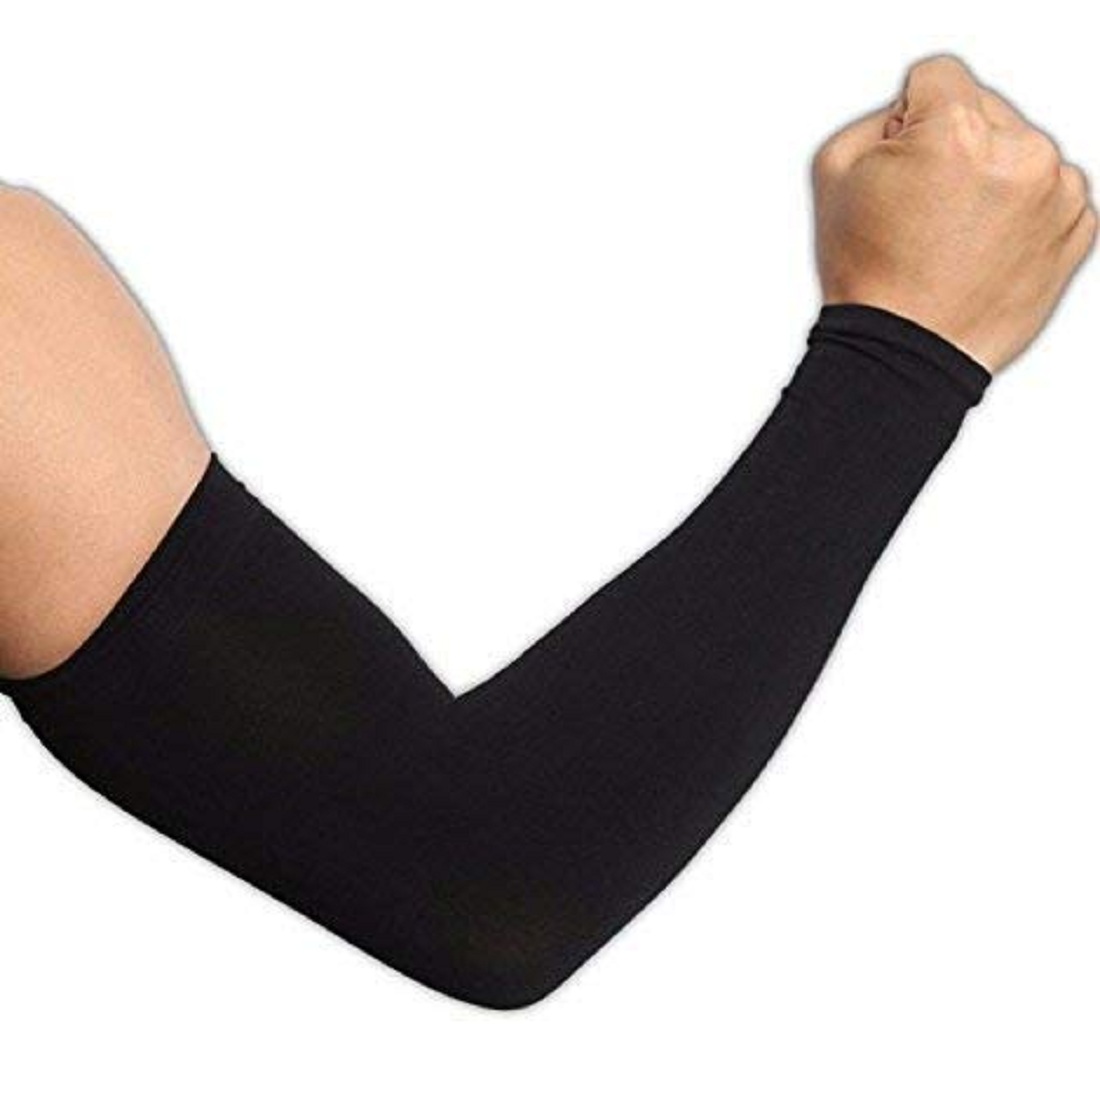 Buy Elite Lycra Arm Sleeves with UV Protection for Sports Driving - 1 ...